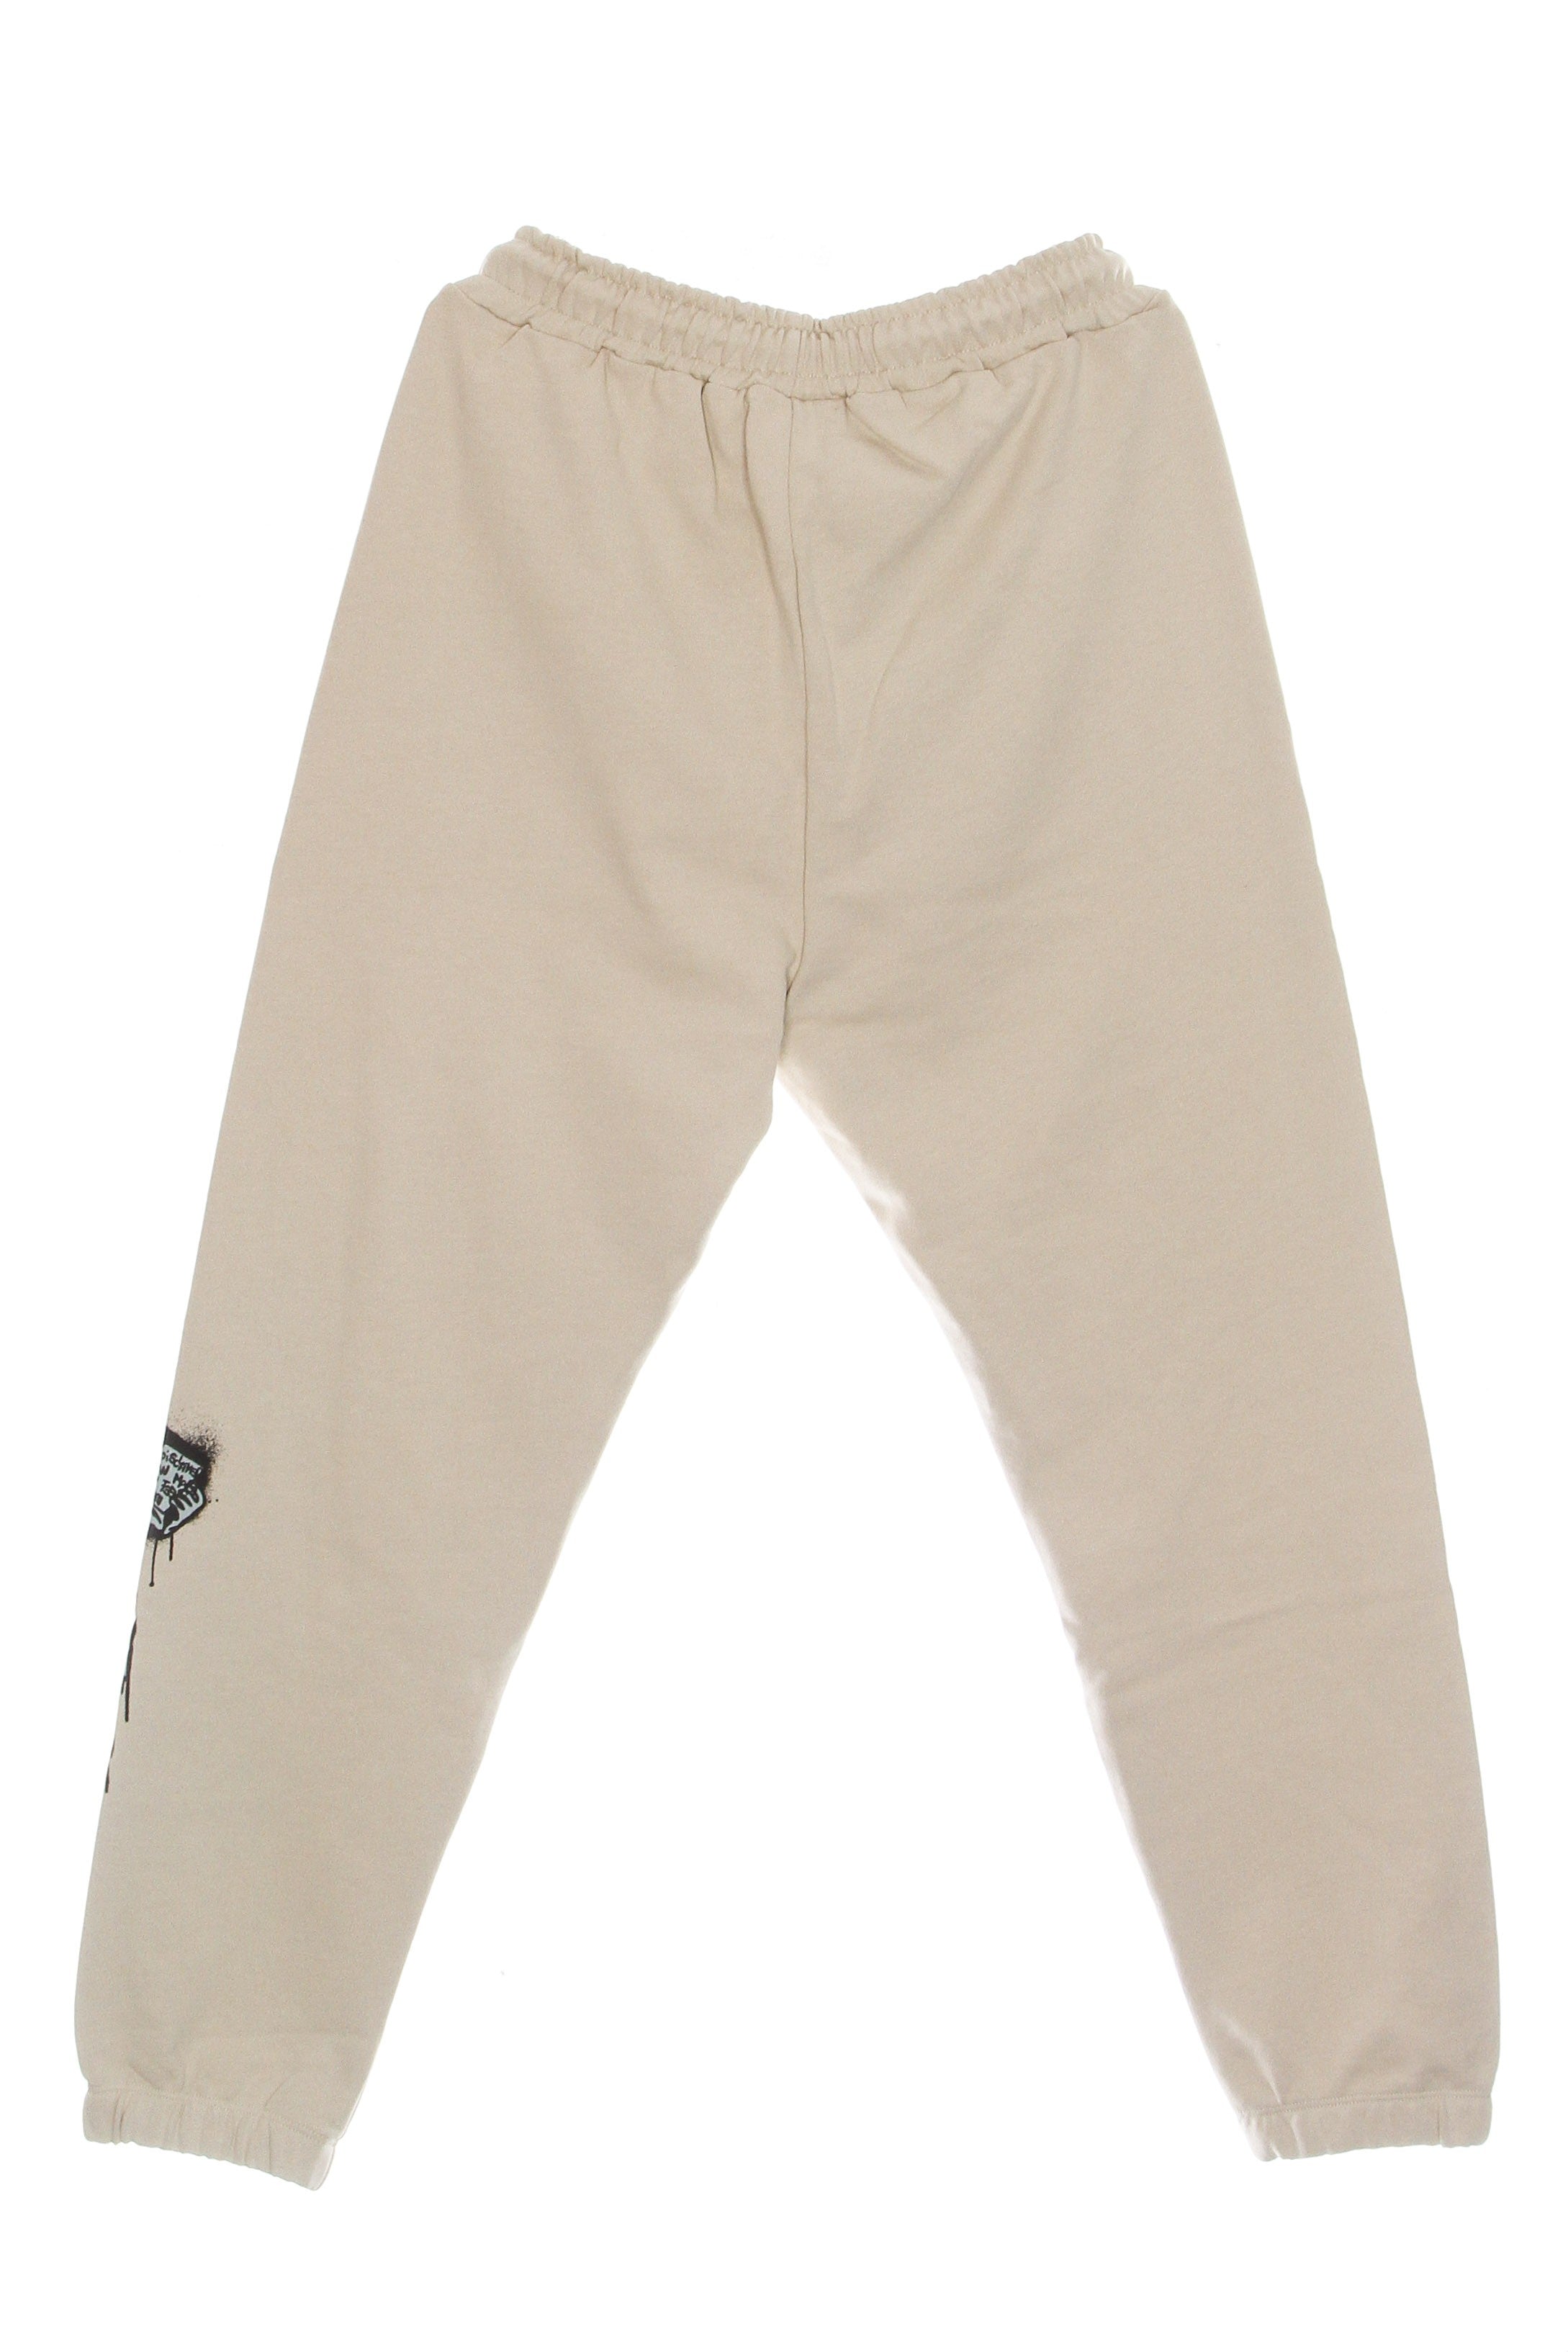 All Right Reserved Pants Safari Men's Lightweight Tracksuit Pants